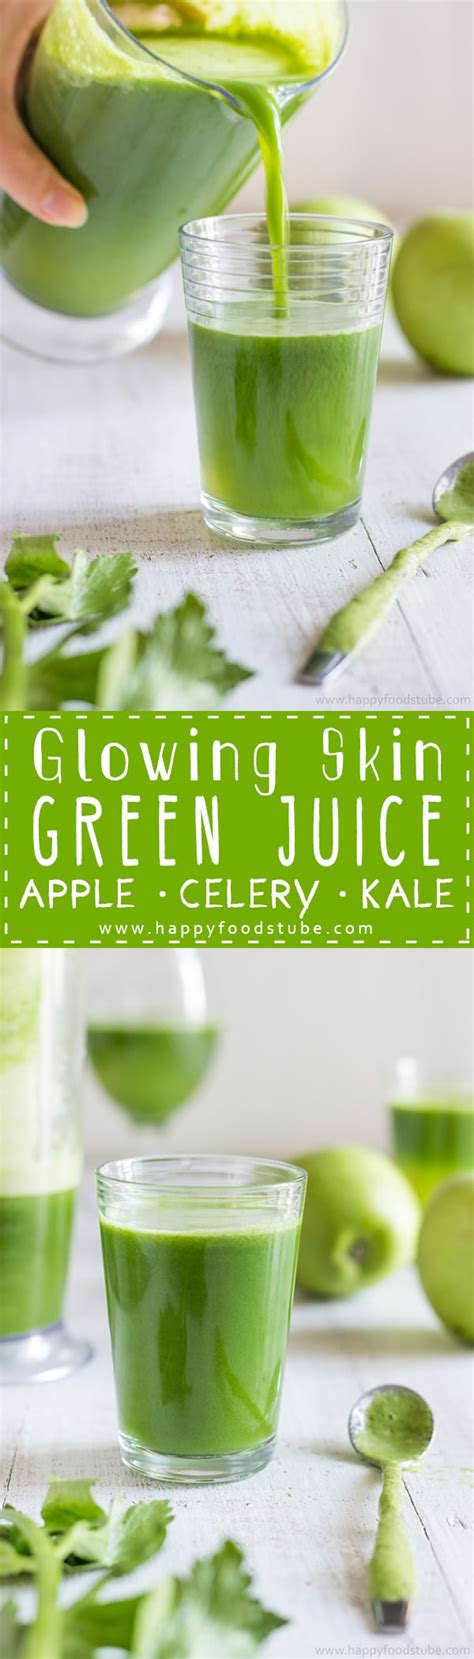 During a typical juice cleanse, i'll drink 7 glasses of juice a day and plenty of water. Glowing Skin Green Juice Recipe - Happy Foods Tube